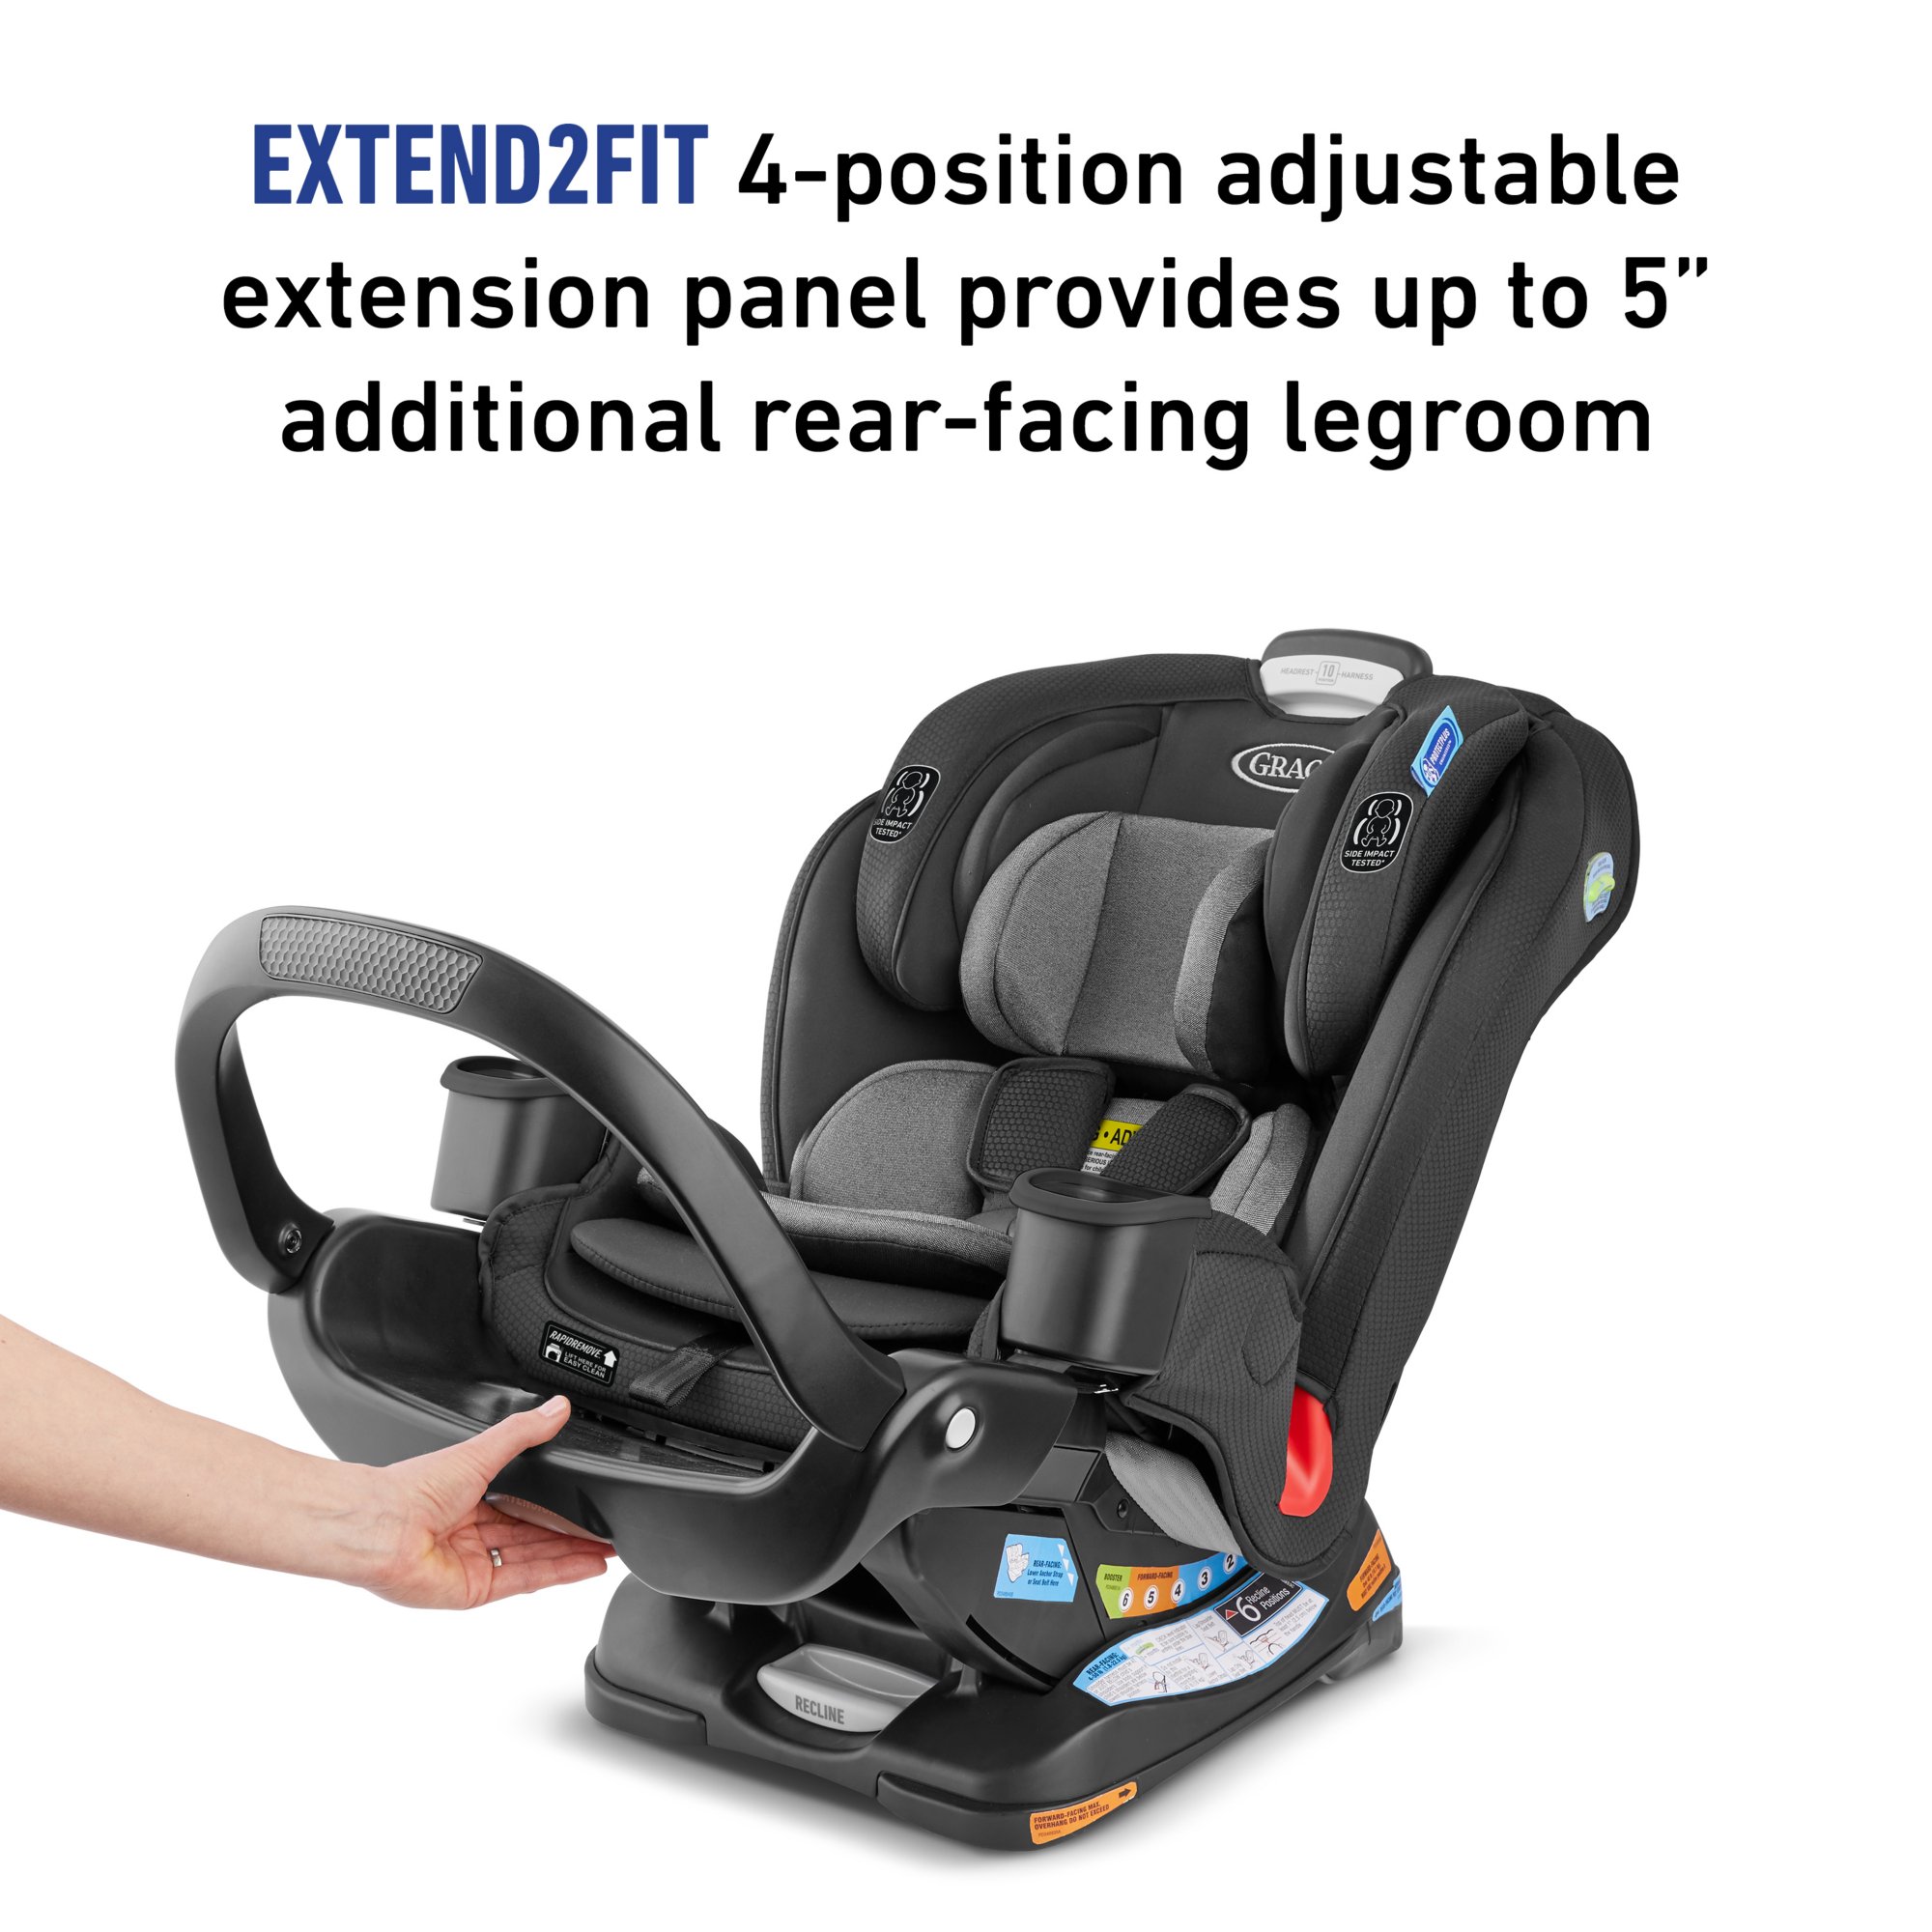 Graco SlimFit 3 in 1 Car Seat -Slim & Comfy Design Saves Space in Your Back  Seat, Darcie, One Size